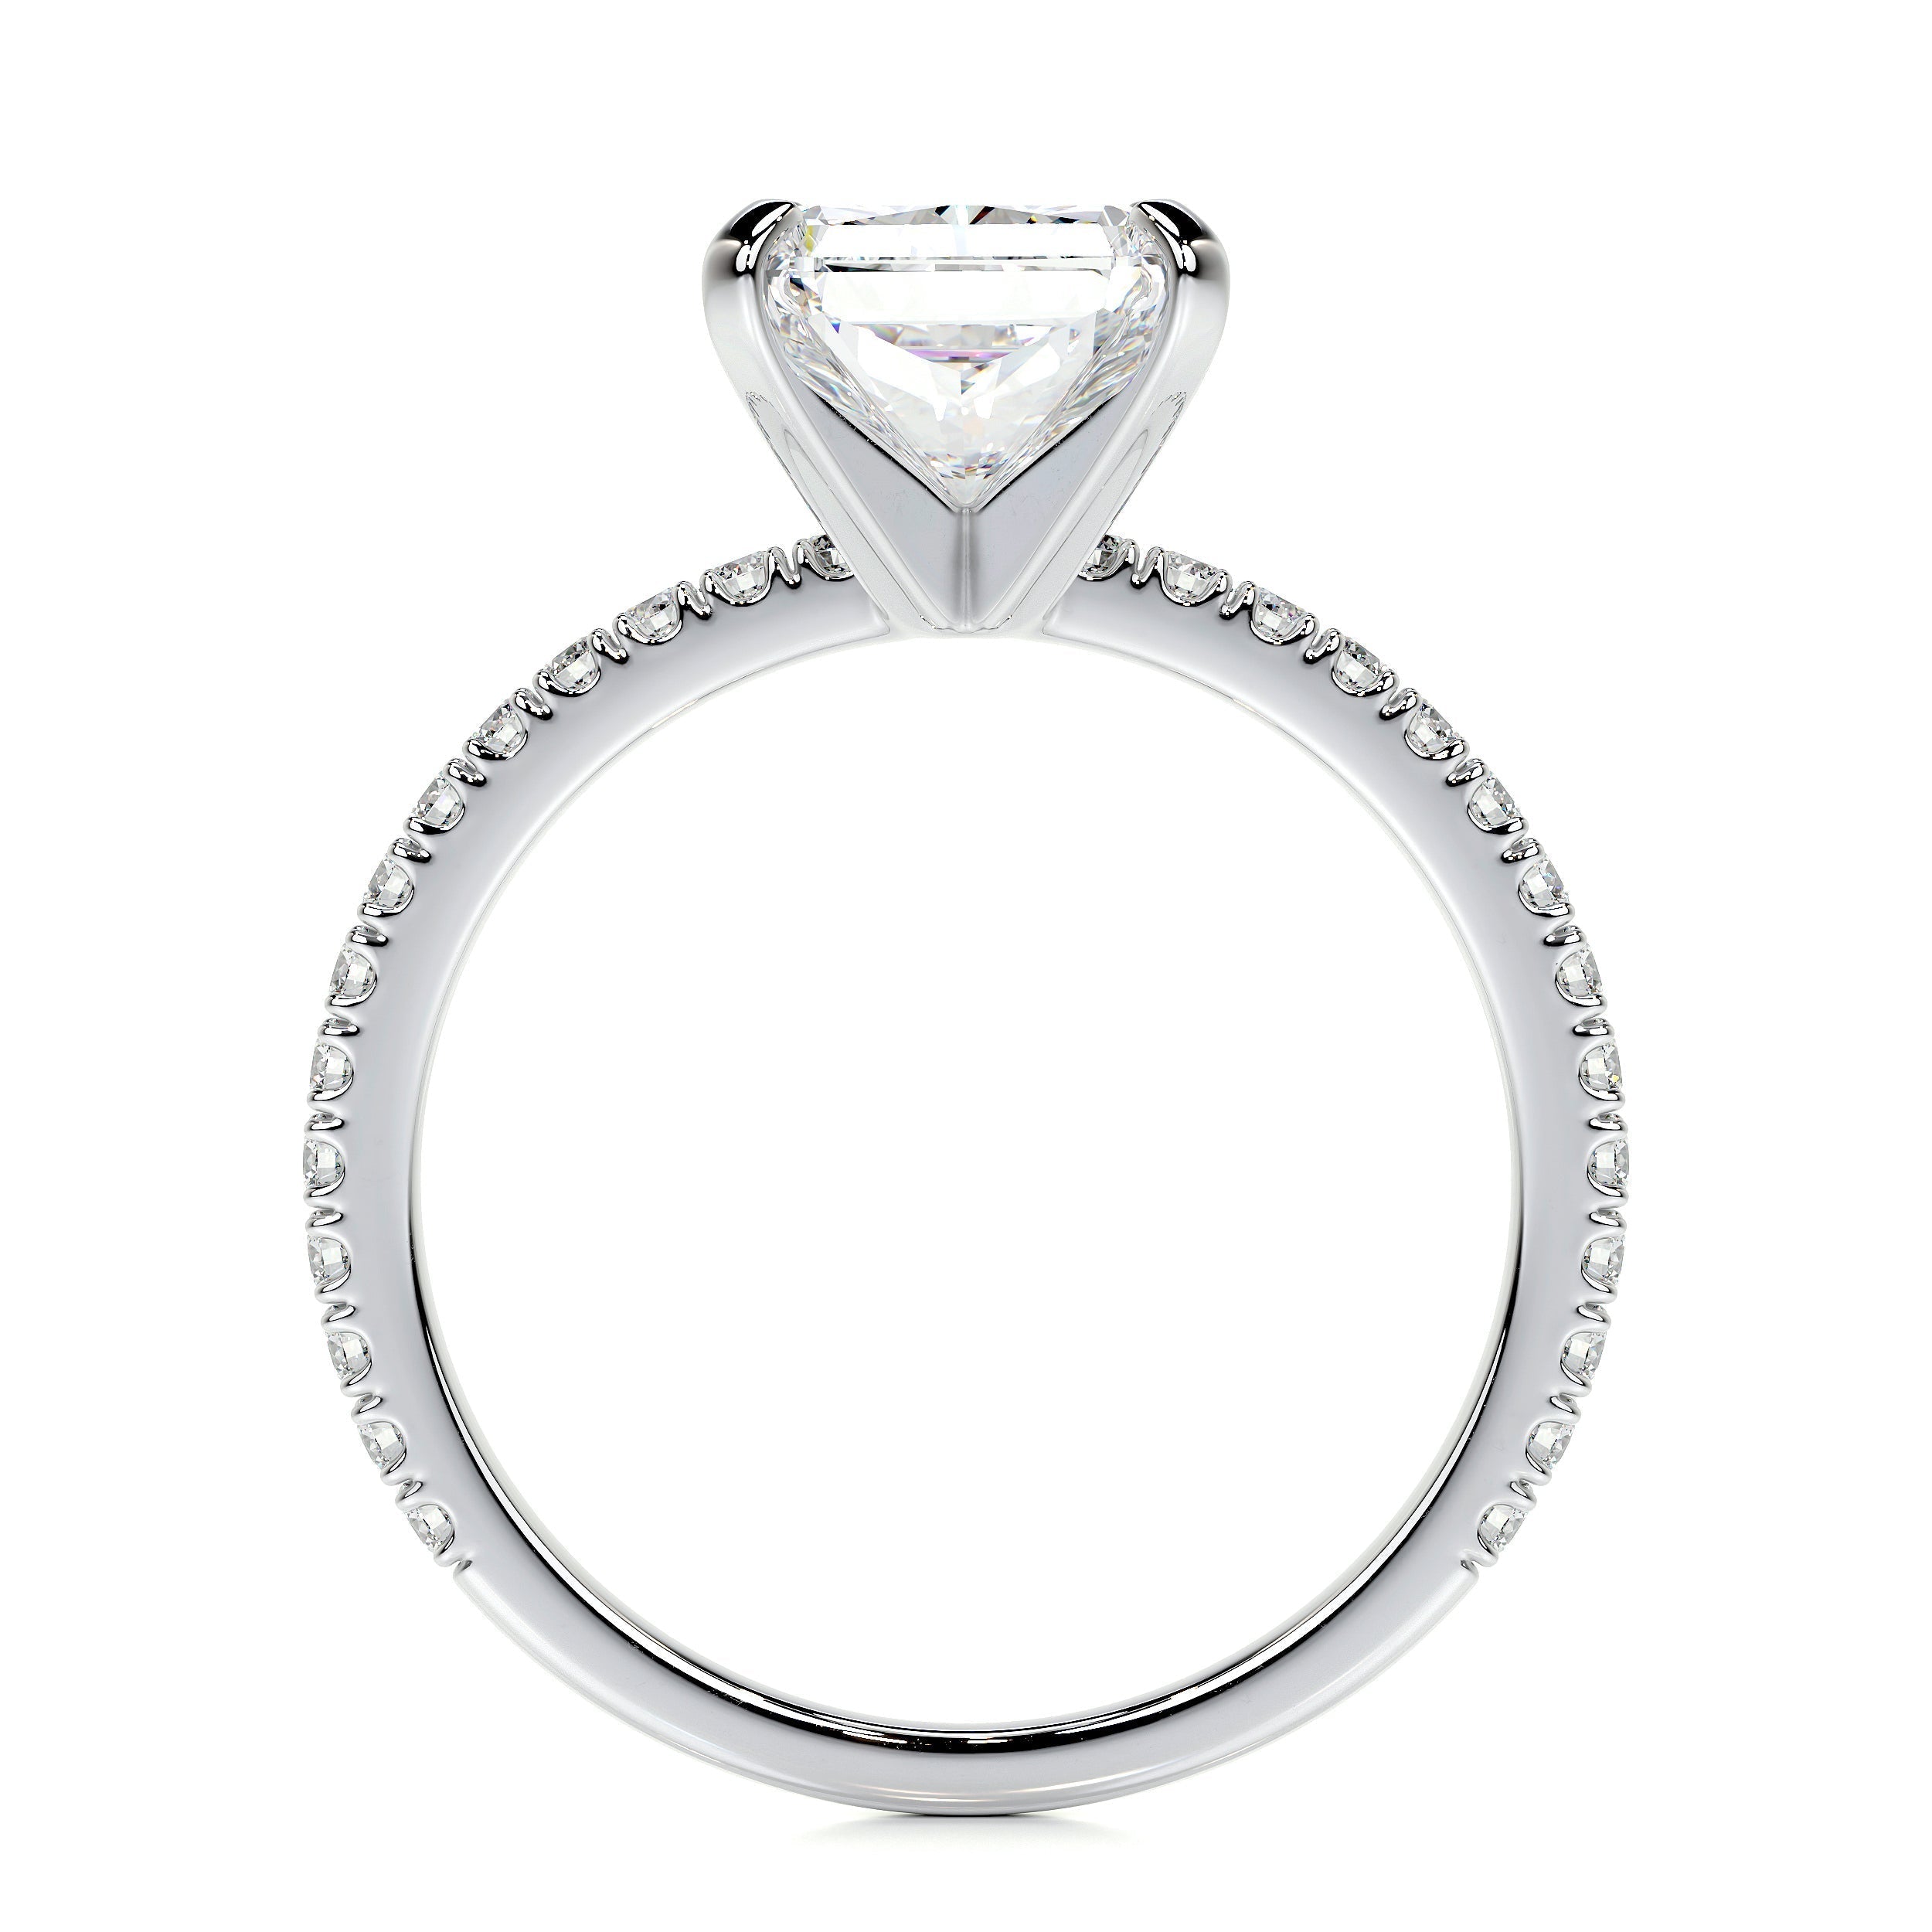 3.0 CT Radiant Solitaire CVD G/SI1 Diamond Engagement Ring 15